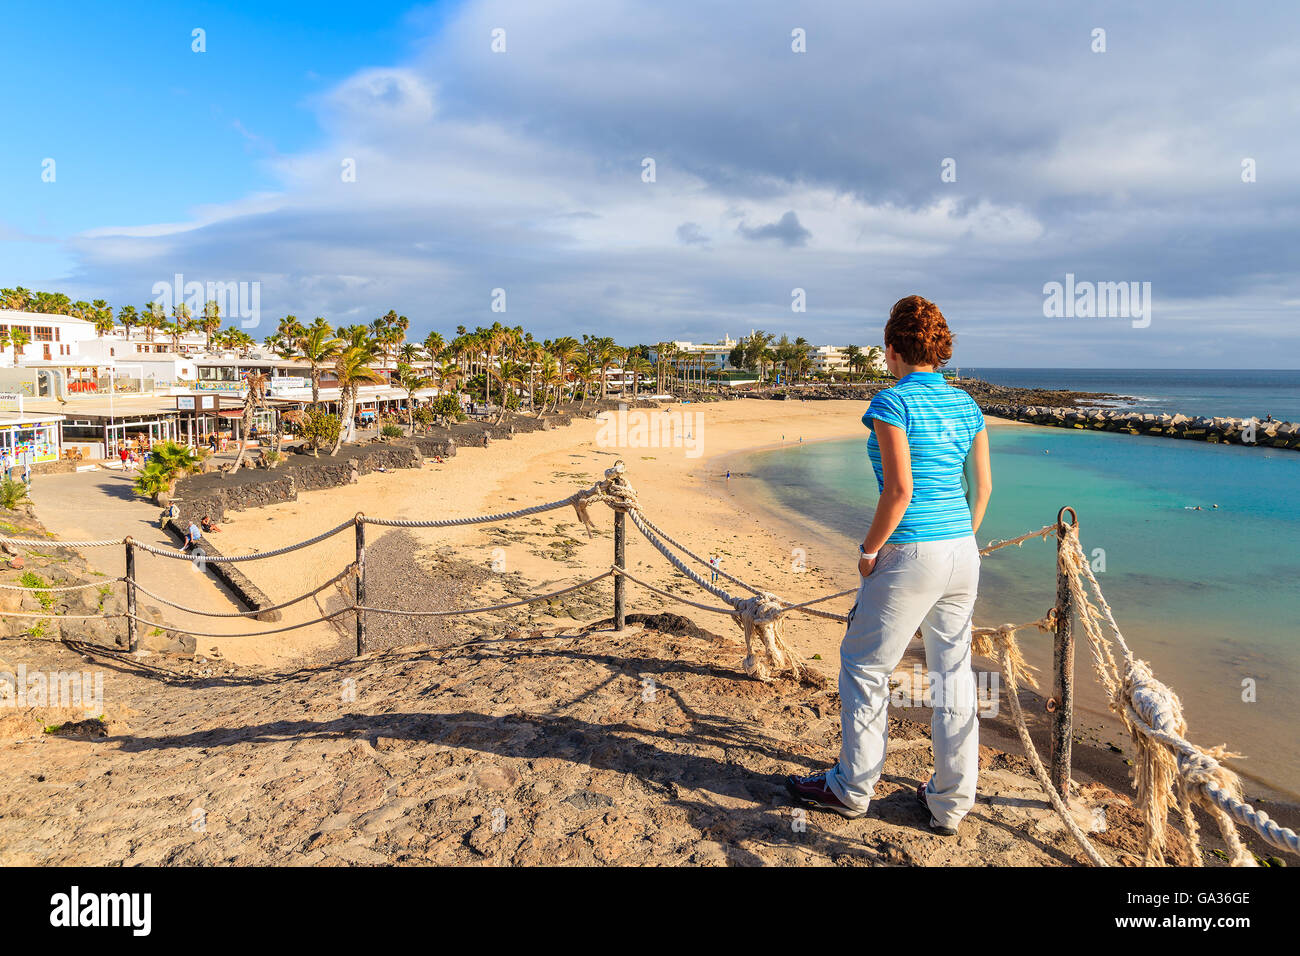 PLAYA BLANCA, LANZAROTE ISLAND - JAN 16, 2015: young woman tourist looking at Flamingo beach from viewpoint. Canary Islands are popular holiday destination for European tourists in winter time. Stock Photo